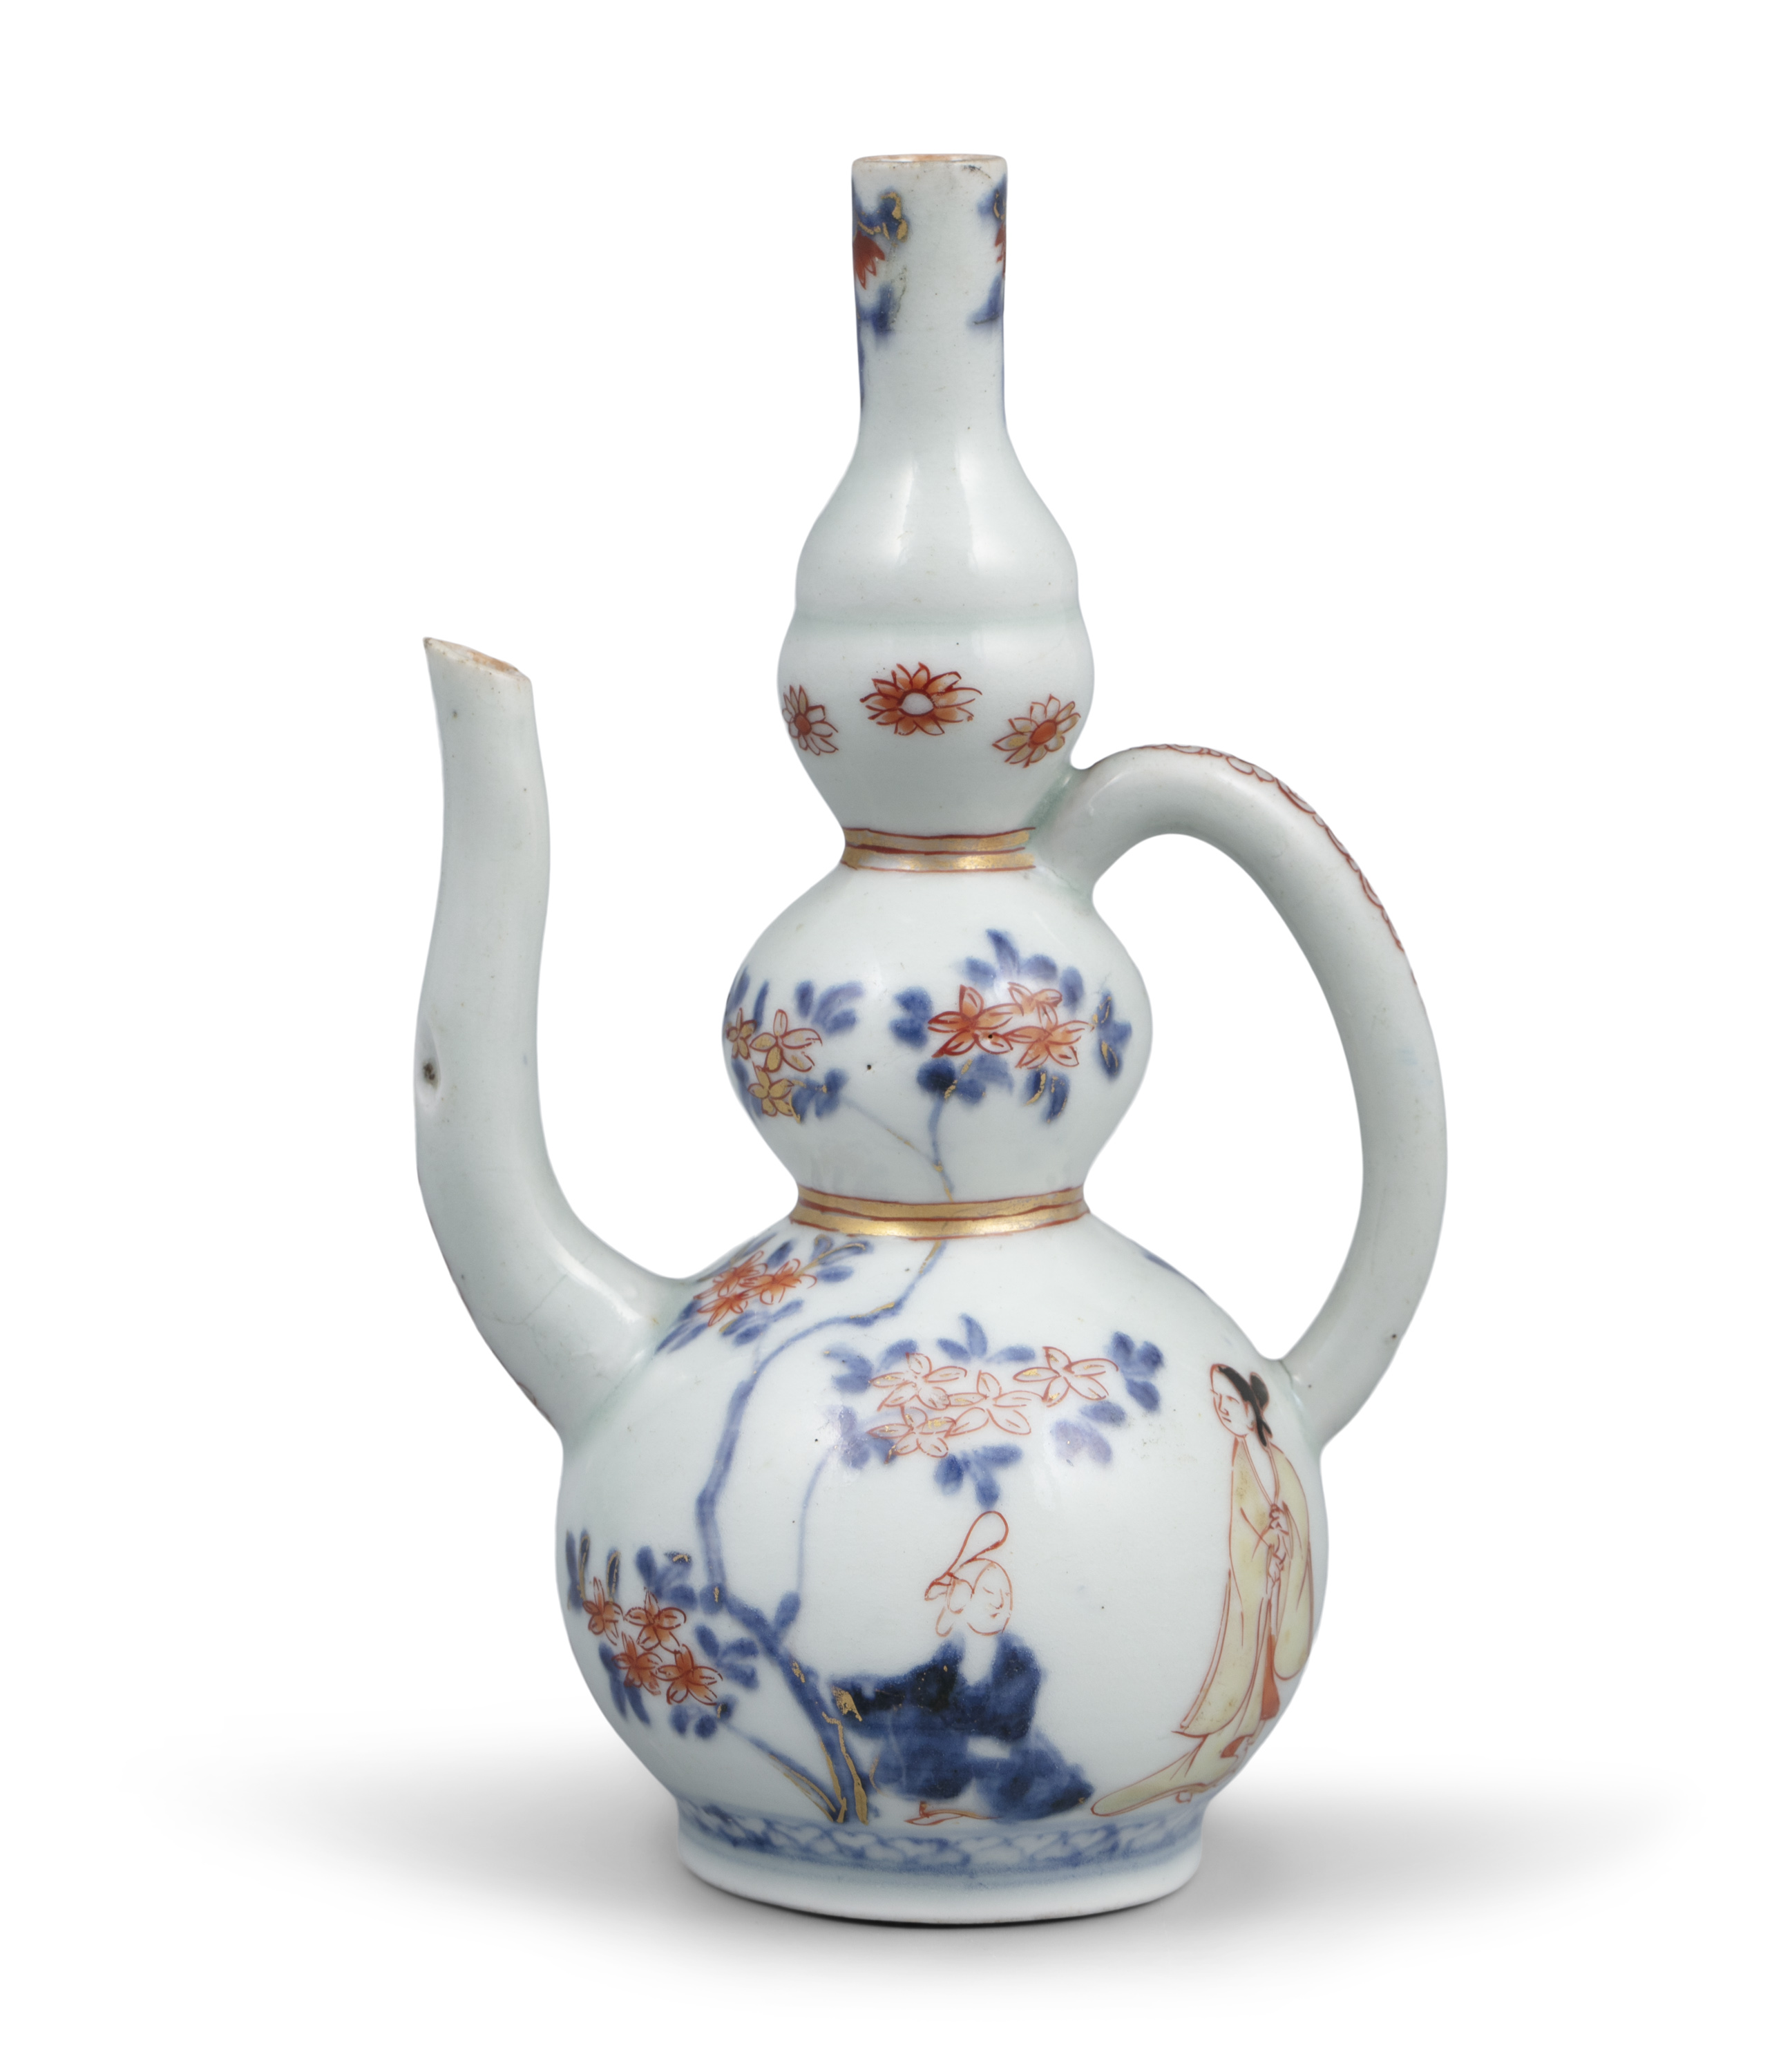 A POSSIBLY KAKIEMON PORCELAIN EWER OF CALABASH / DOUBLE GOURD SHAPE POSSIBLY JAPAN, EDO, 18TH